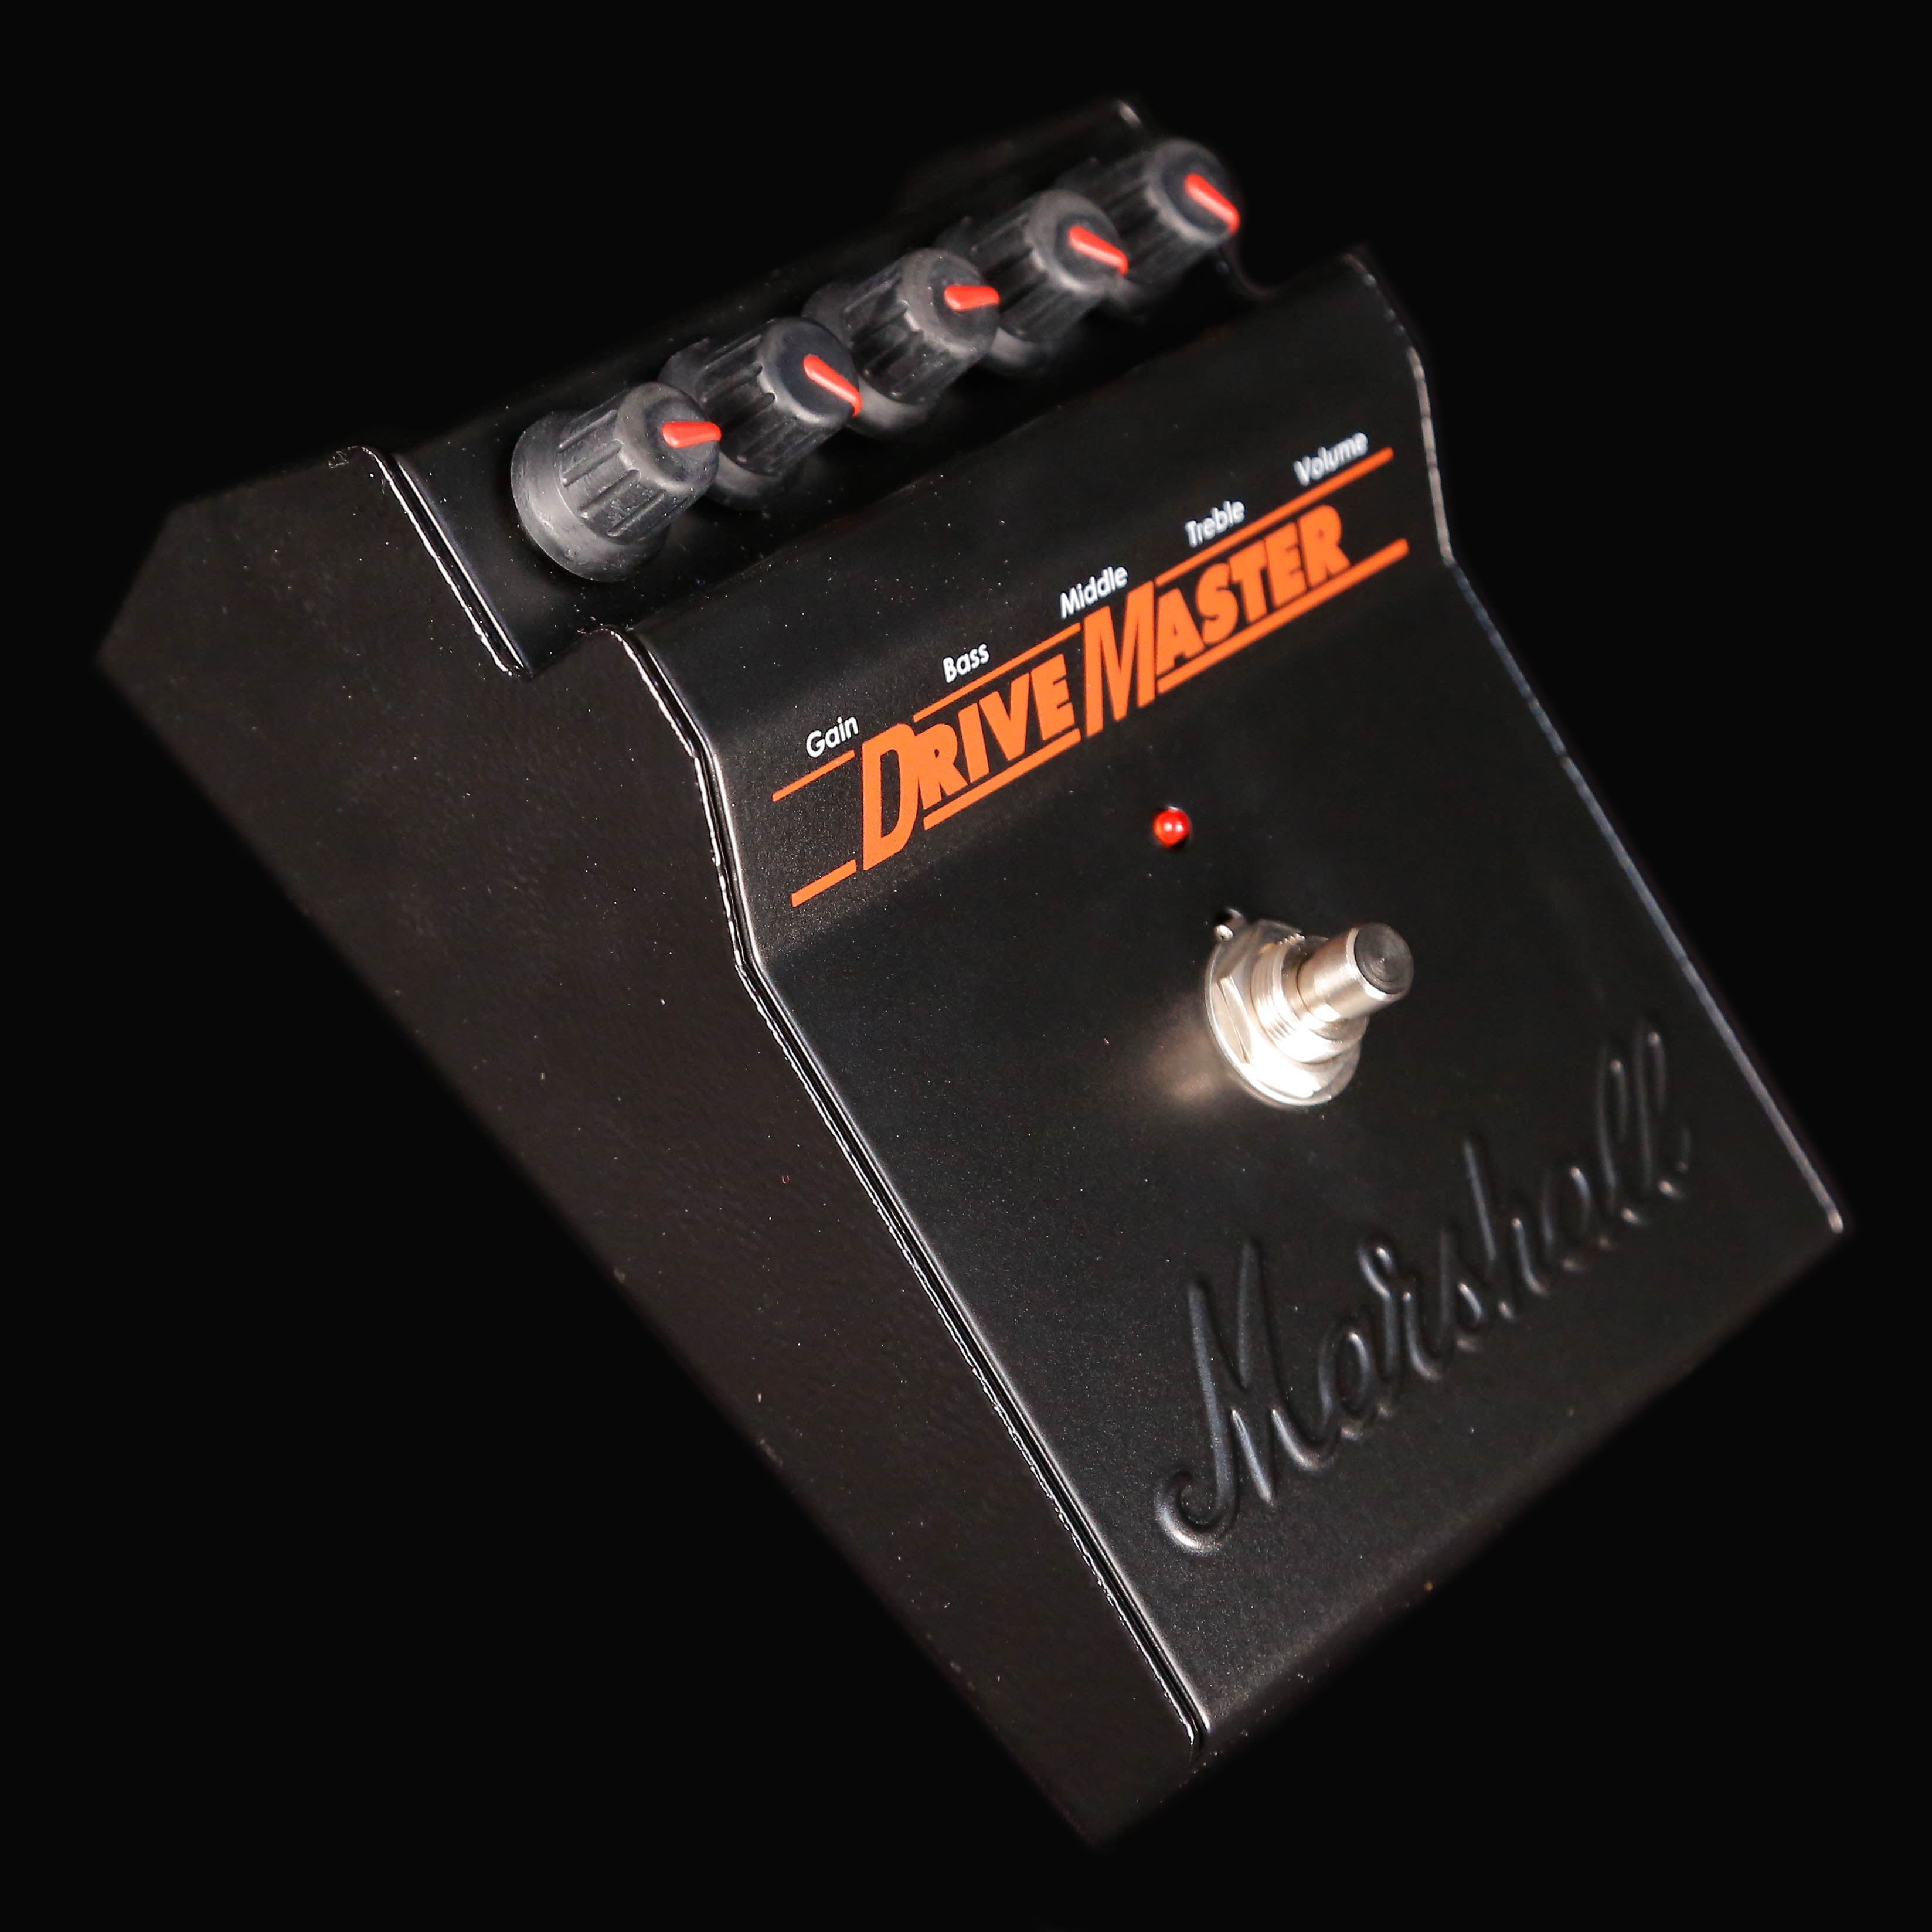 Marshall Drive Master Overdrive/Distortion Pedal, Vintage Reissue